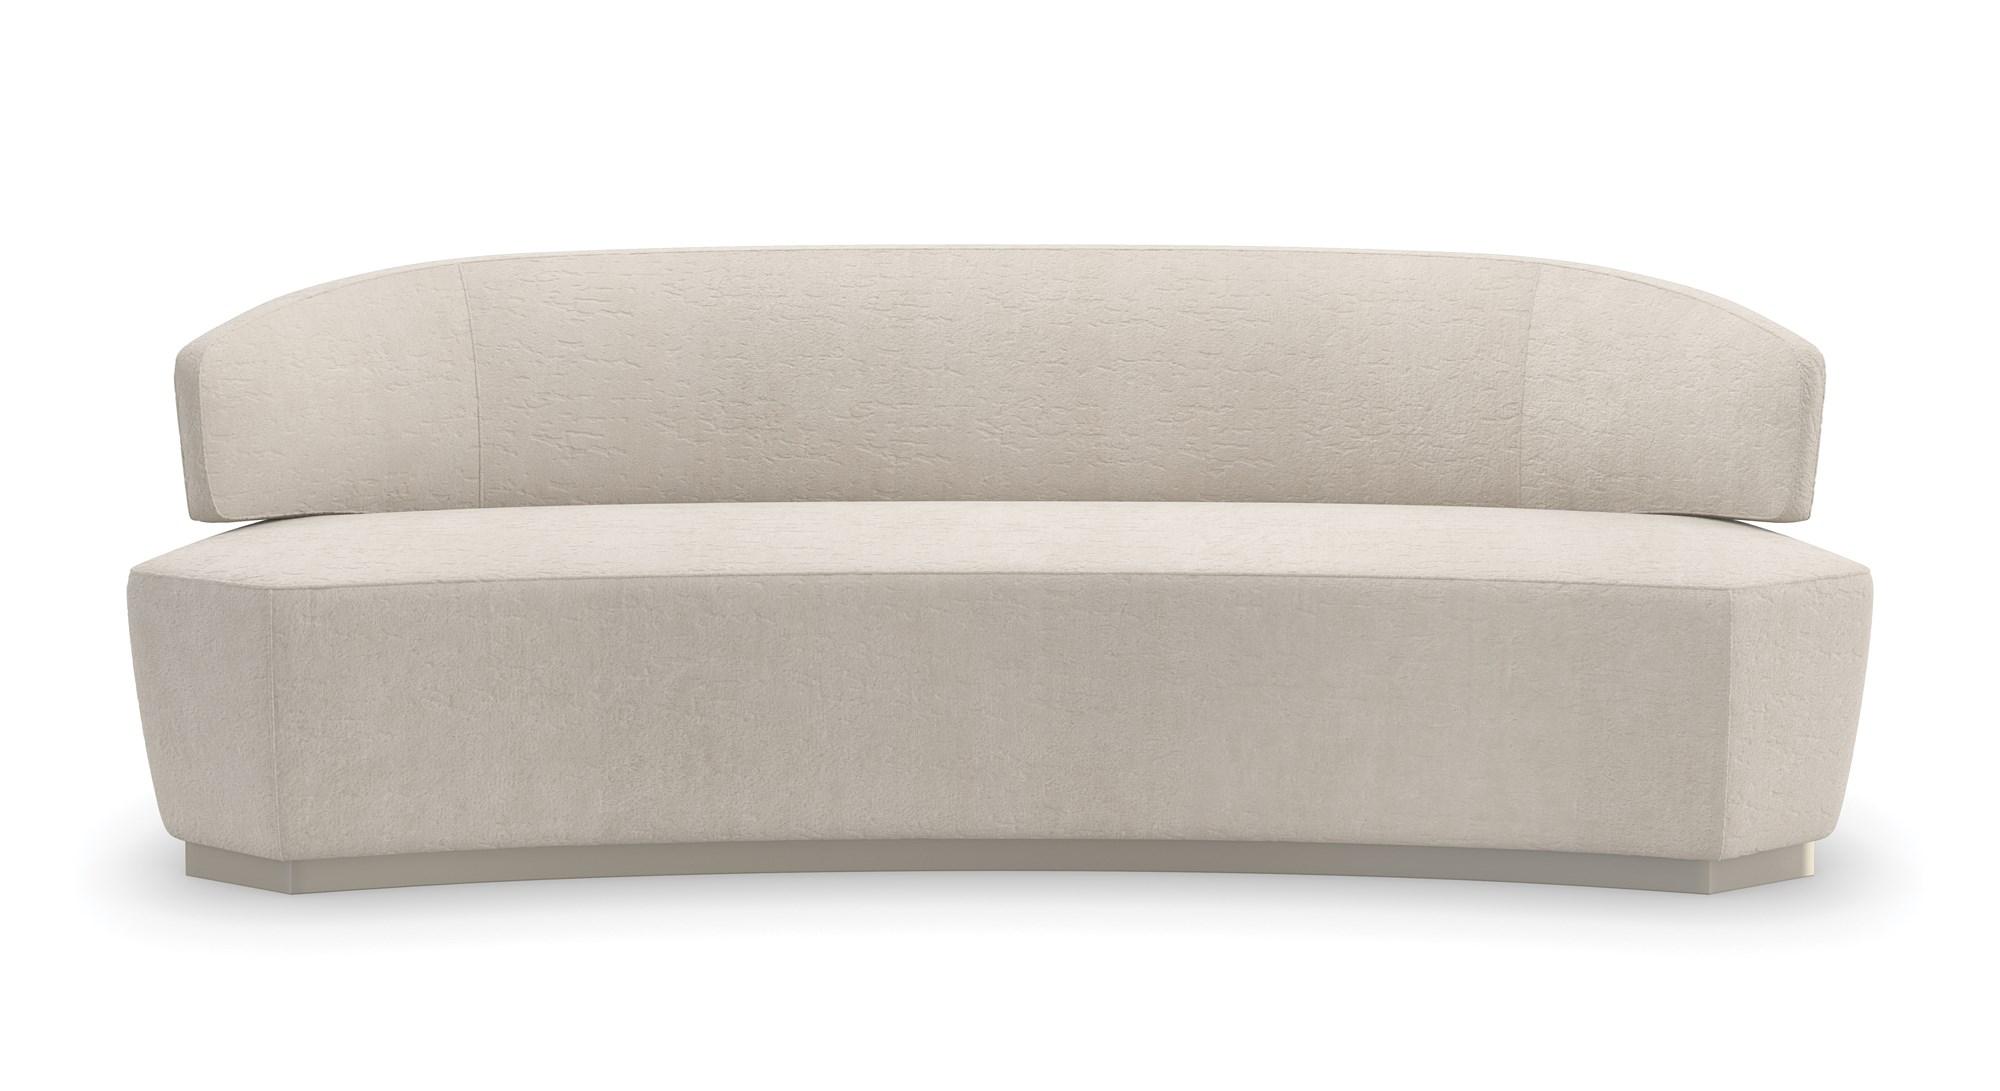 

    
Distressed Ivory Velvet Sparkling Argent Finish OLYMPIA SOFA by Caracole
